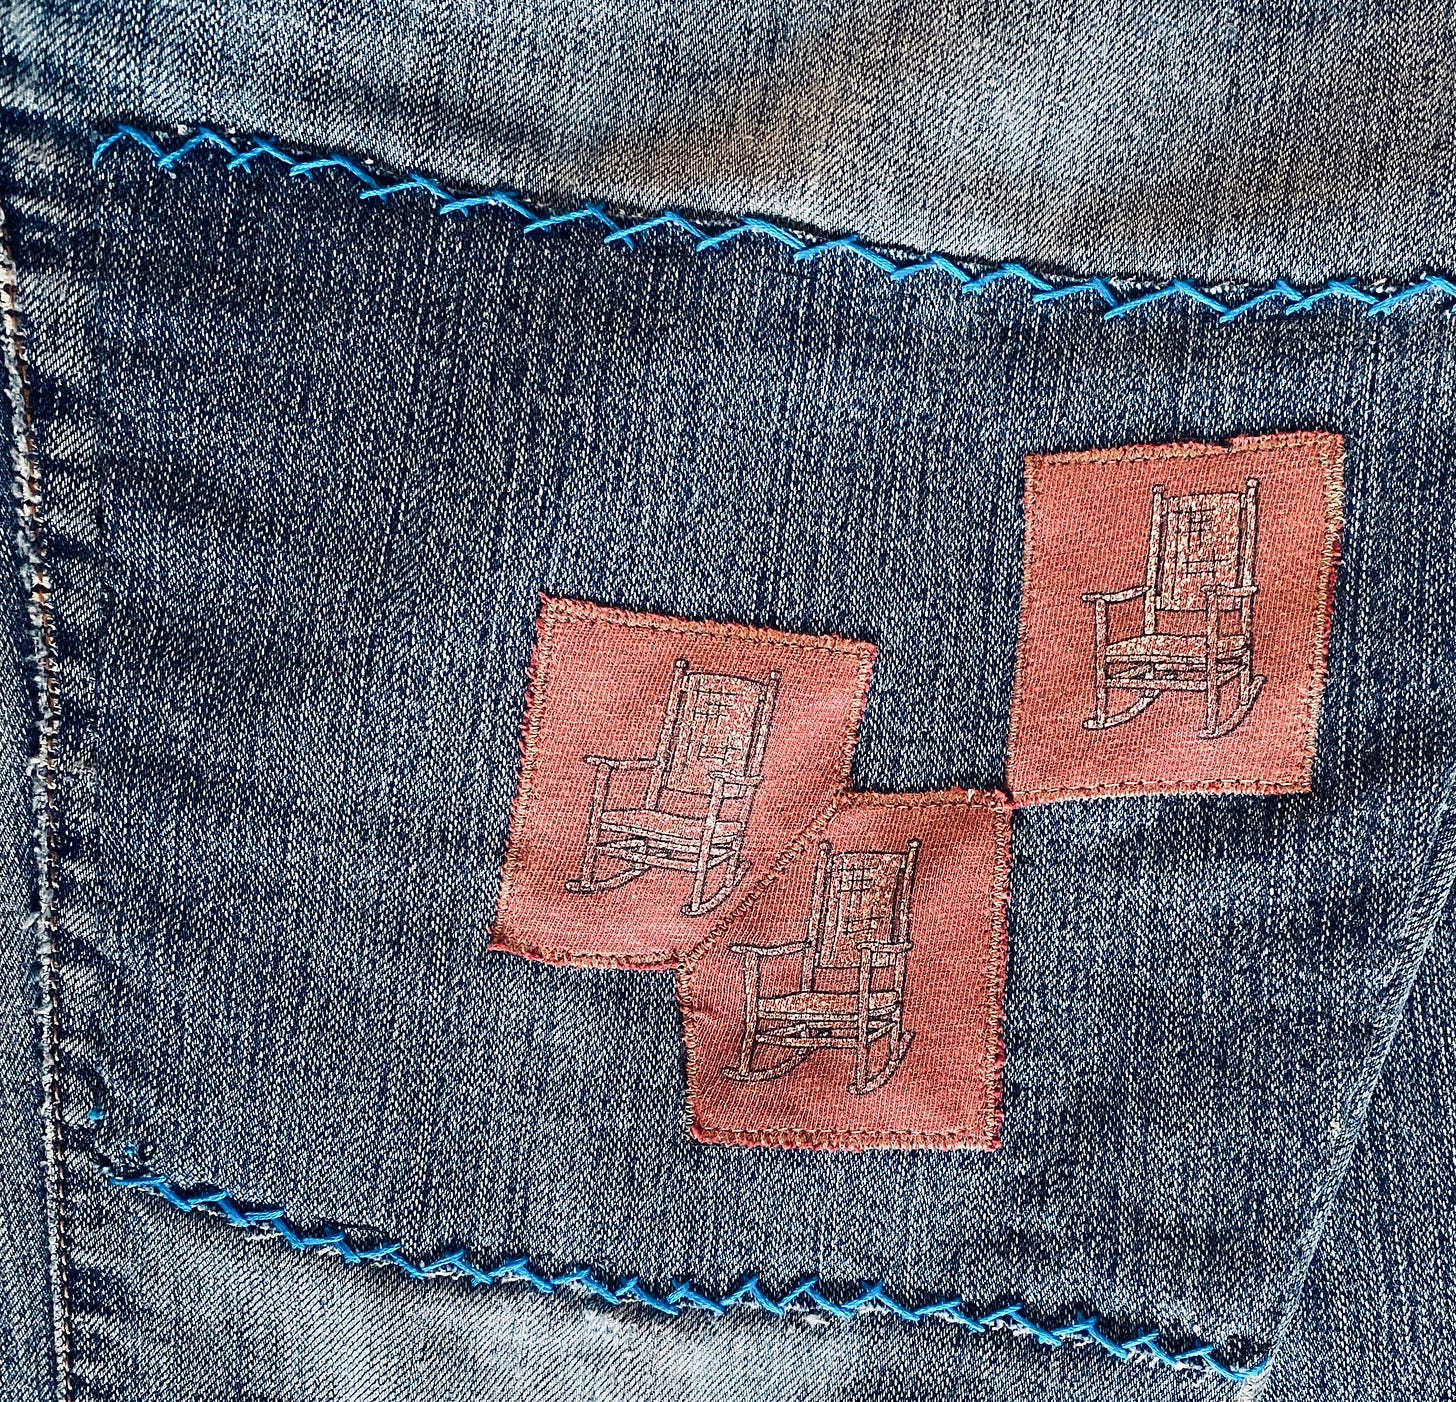 Patches and embroidery on an old pair of jeans.